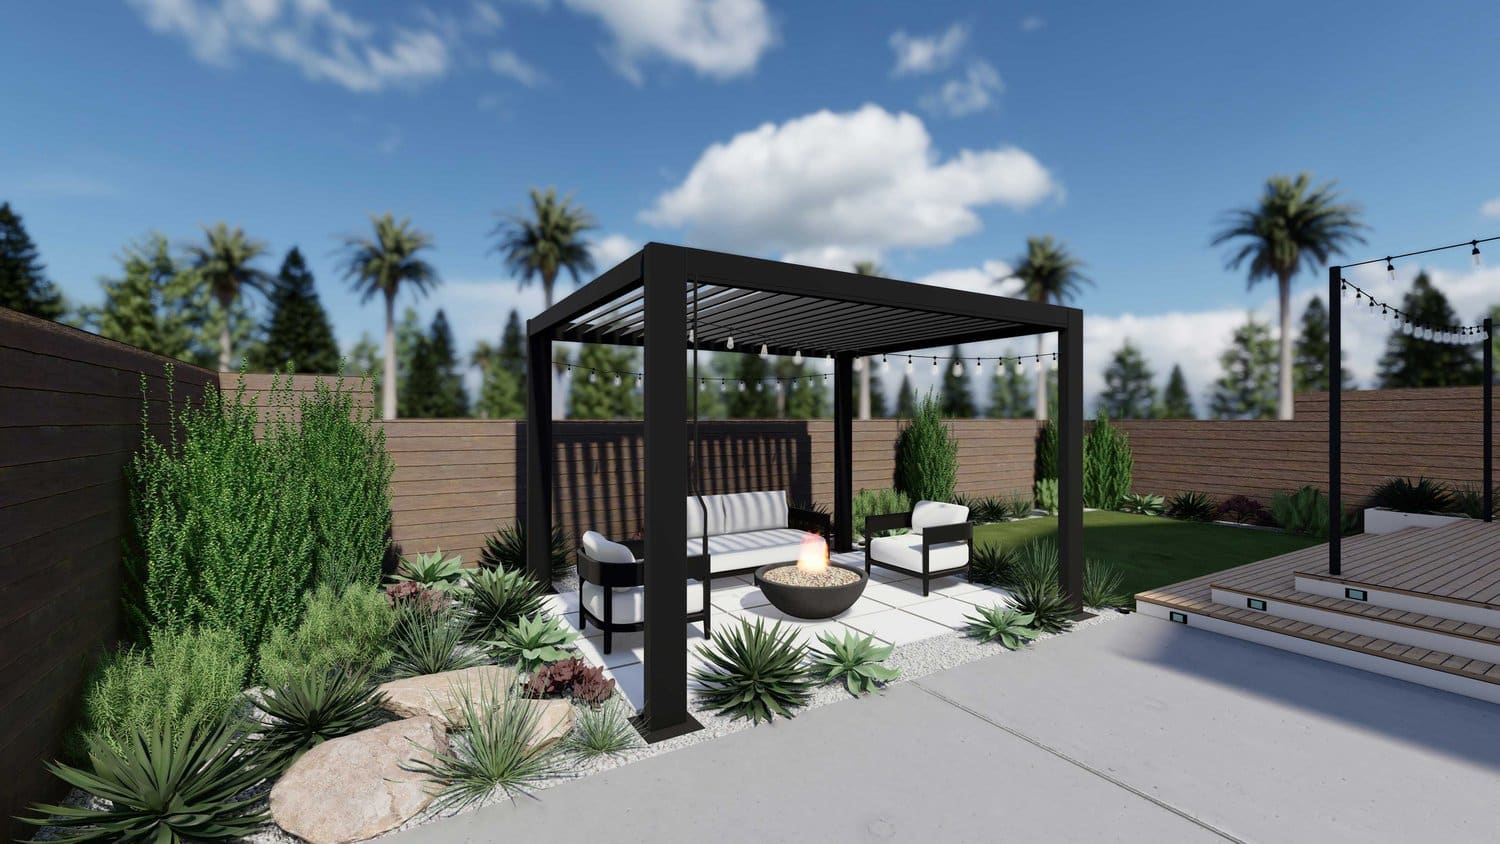 Los Angeles paver patio with pergola over fire pit seating area, drought tolerant plants, grass, gravel and deck